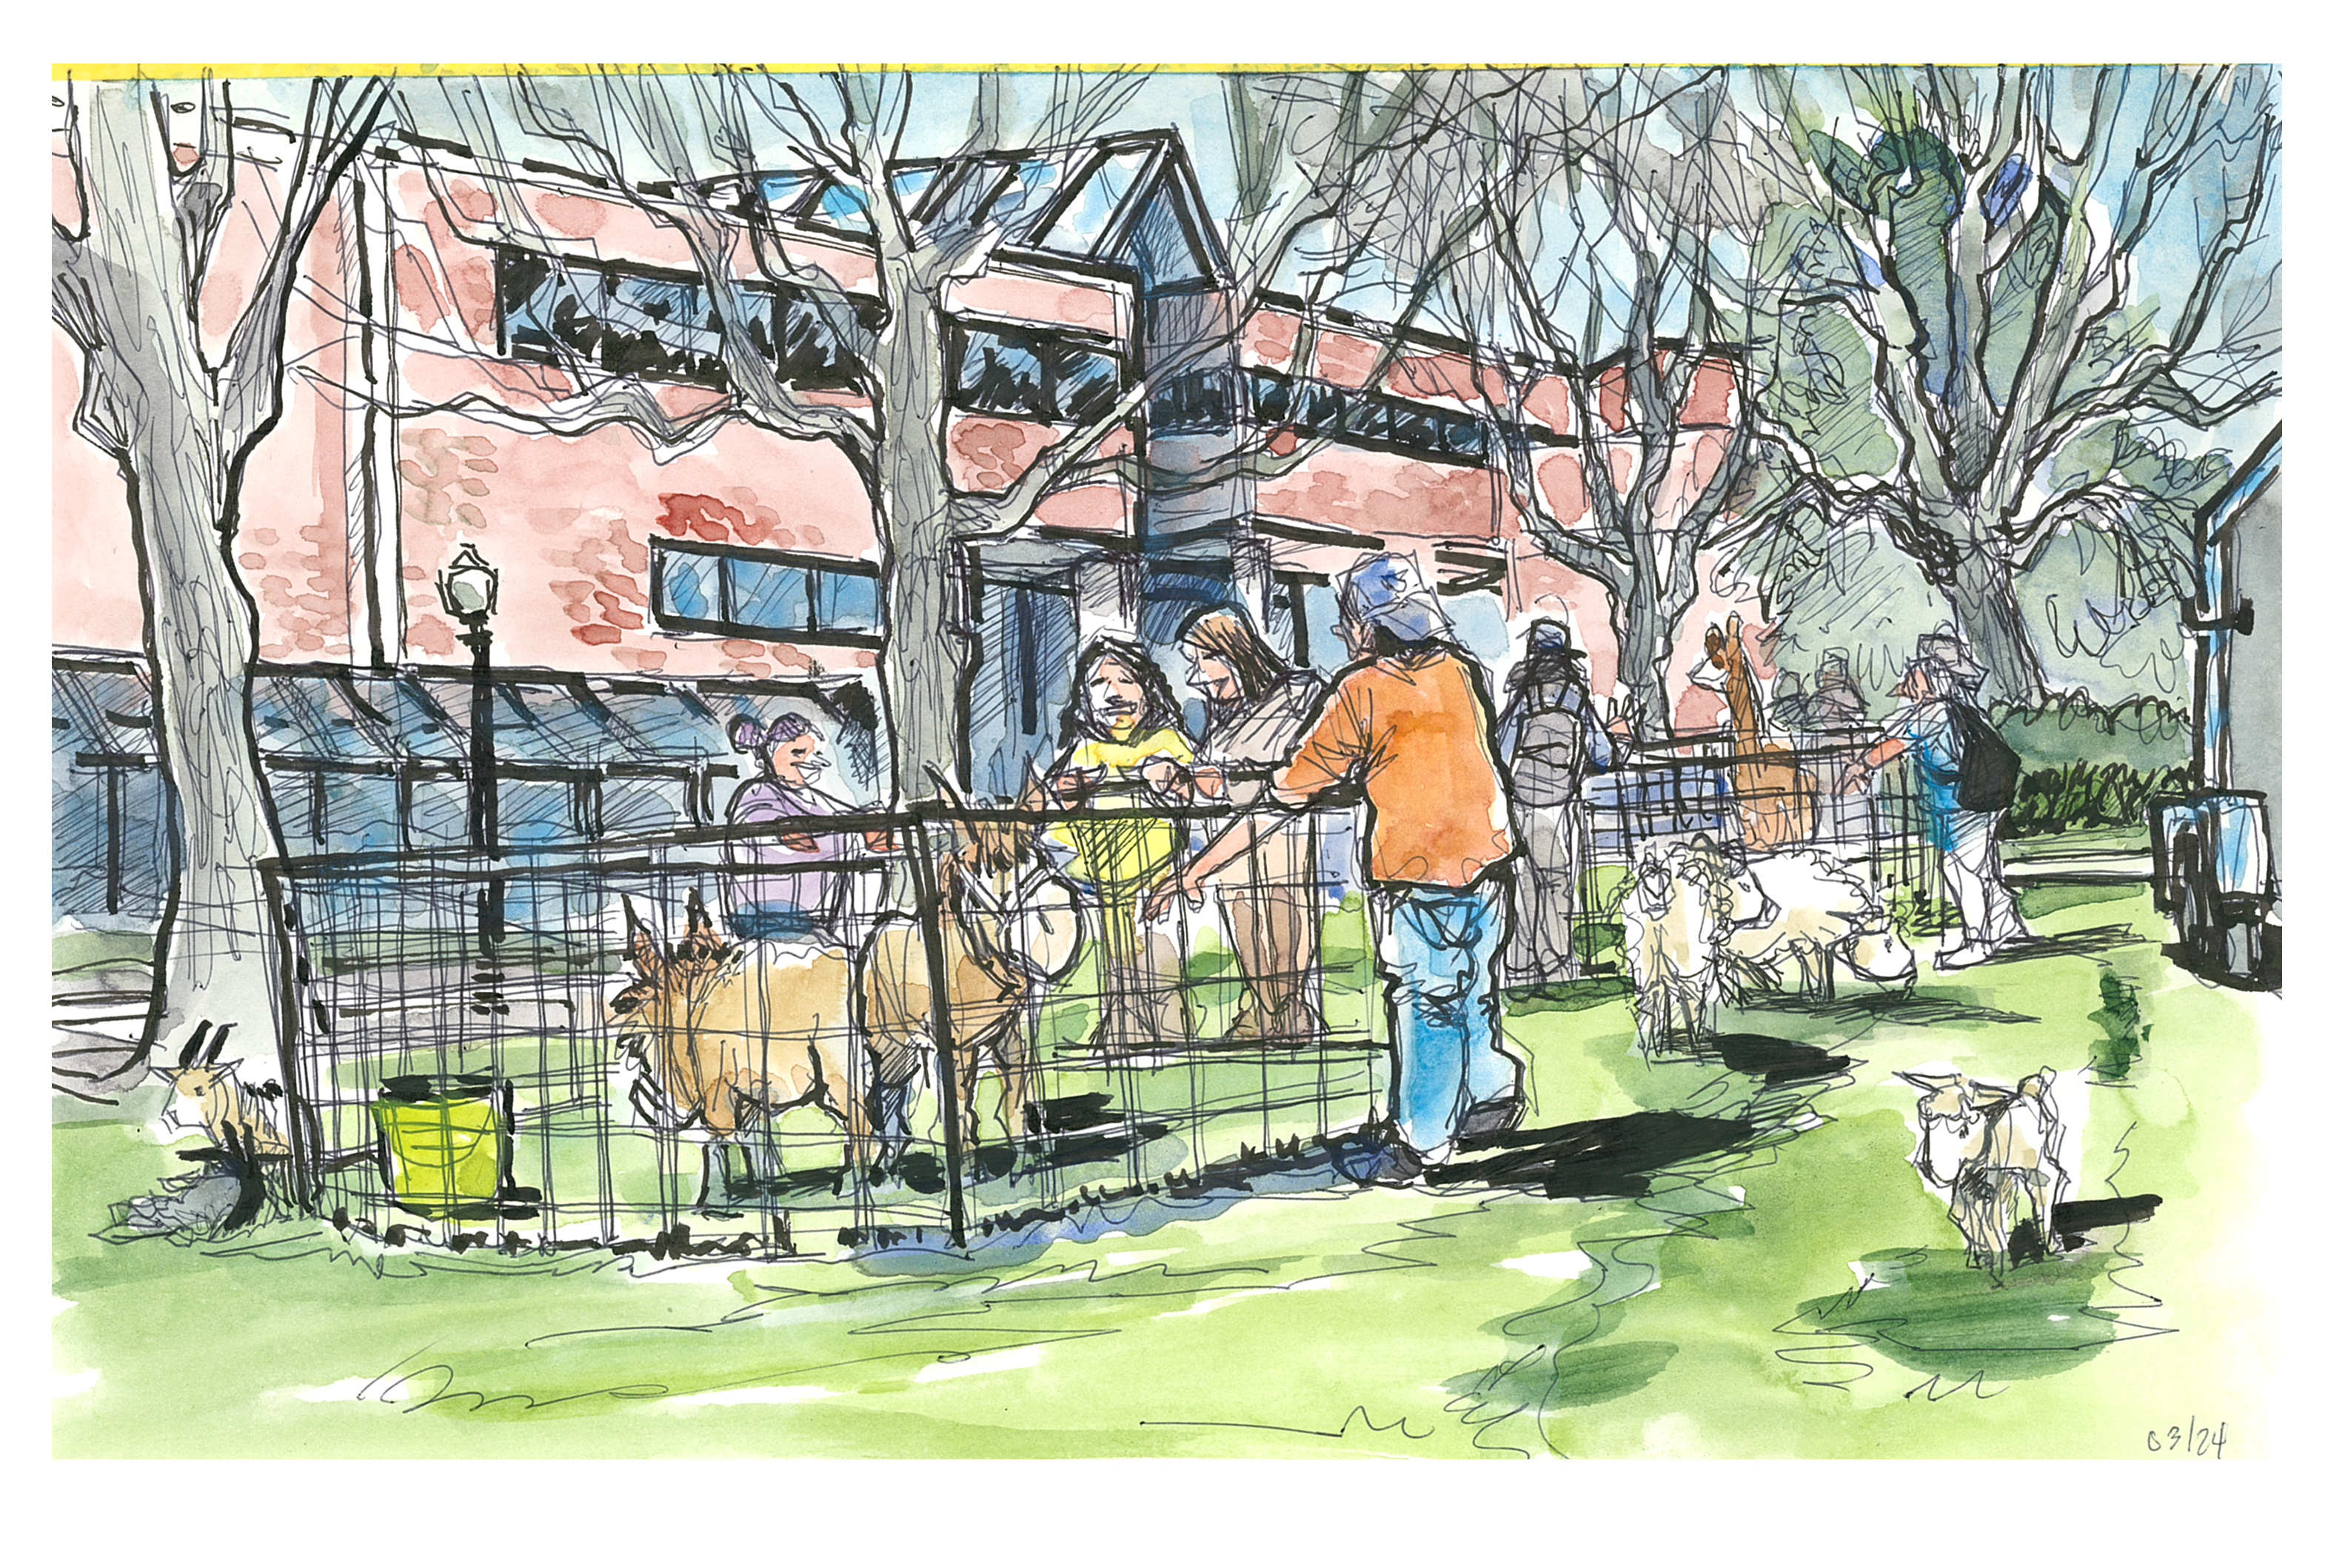 Ink and watercolor sketch of fpetting zoo undraising events on teh glc lawn 